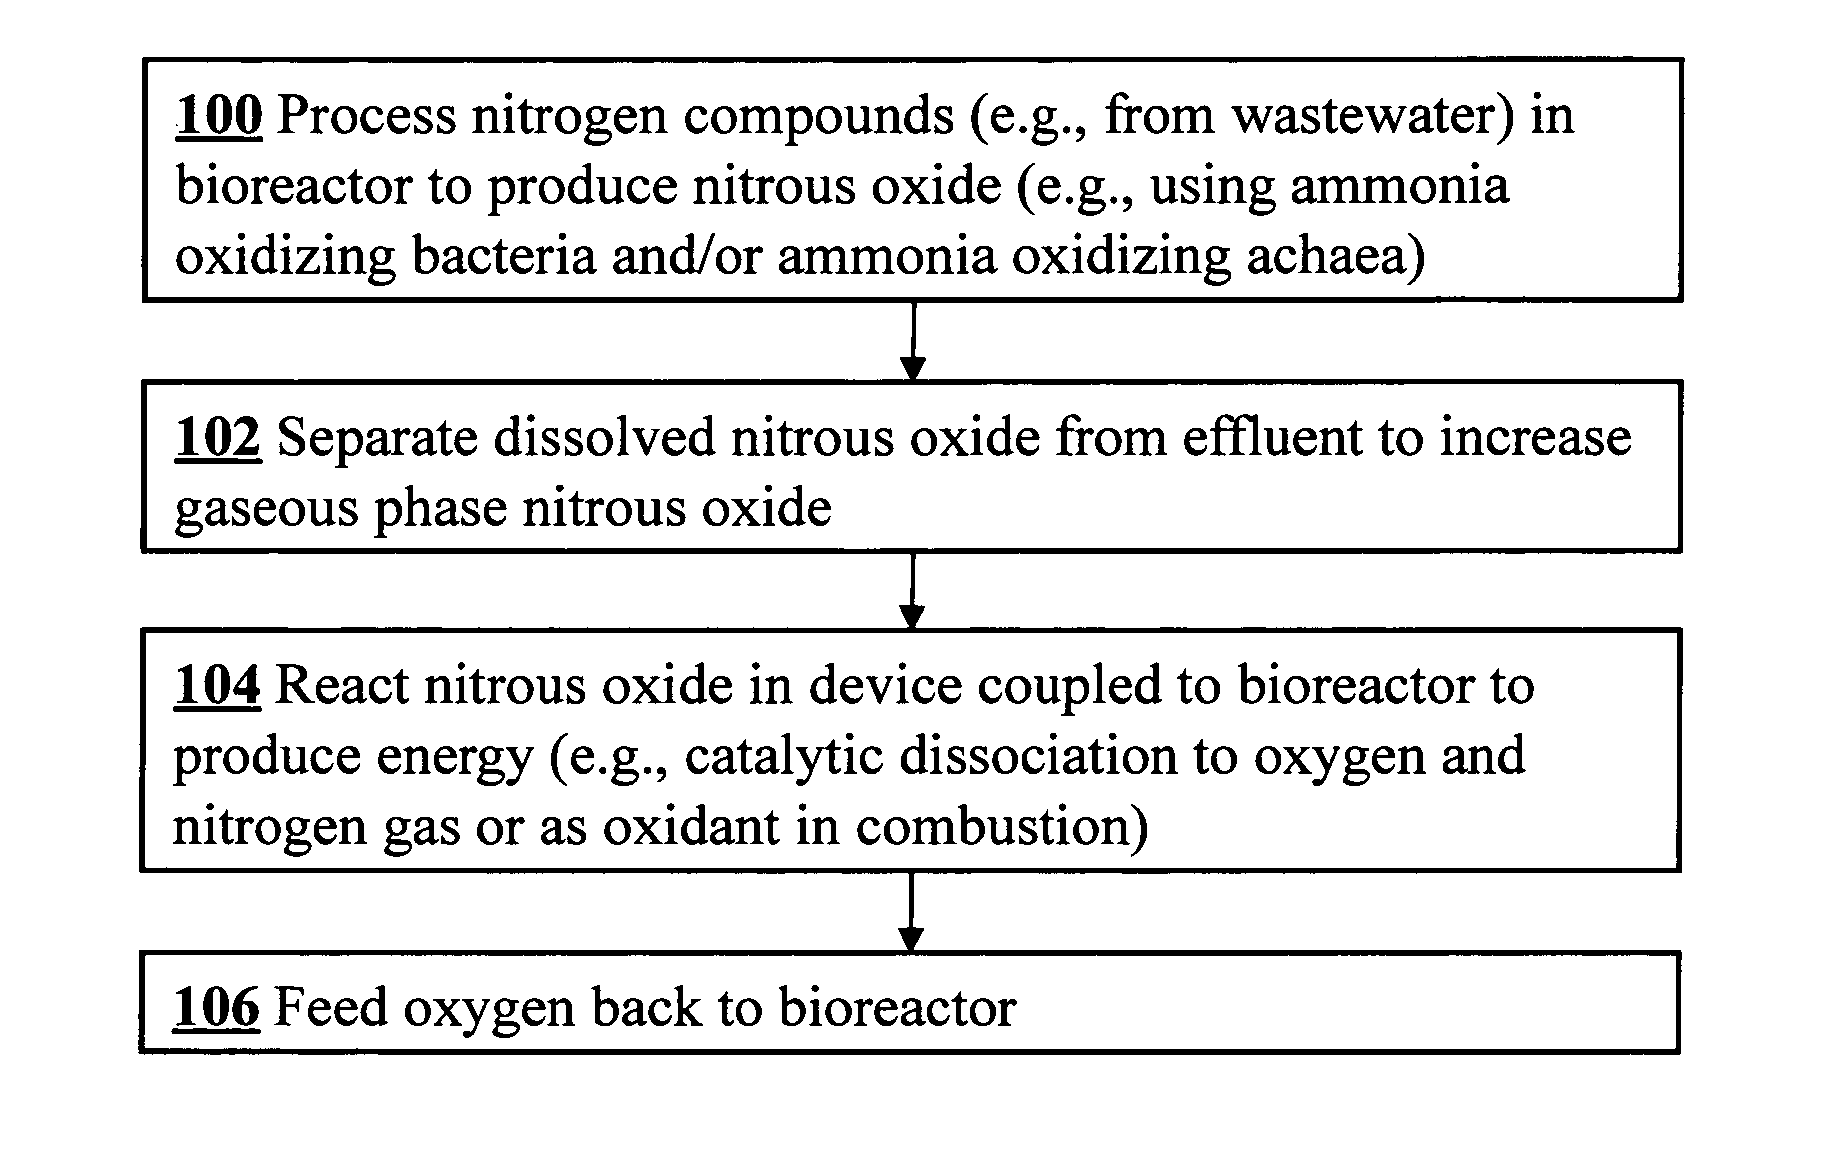 Microbial production of nitrous oxide coupled with chemical reaction of gaseous nitrous oxide